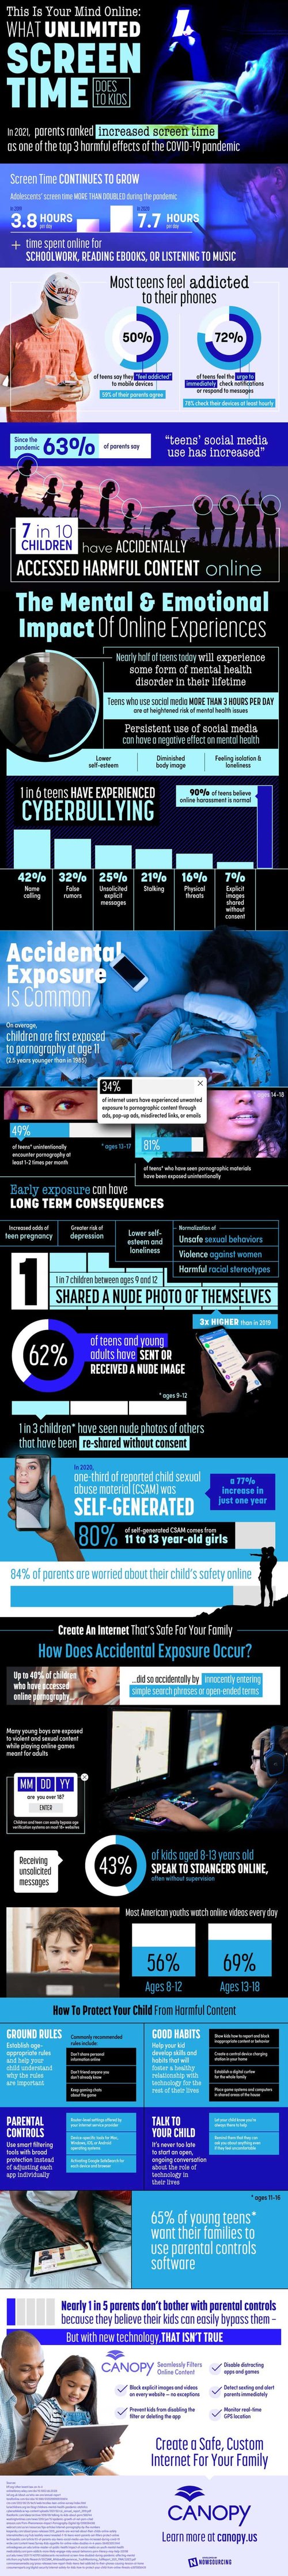 This Is Your Mind Online: What Unlimited Screen Time Does To Kids